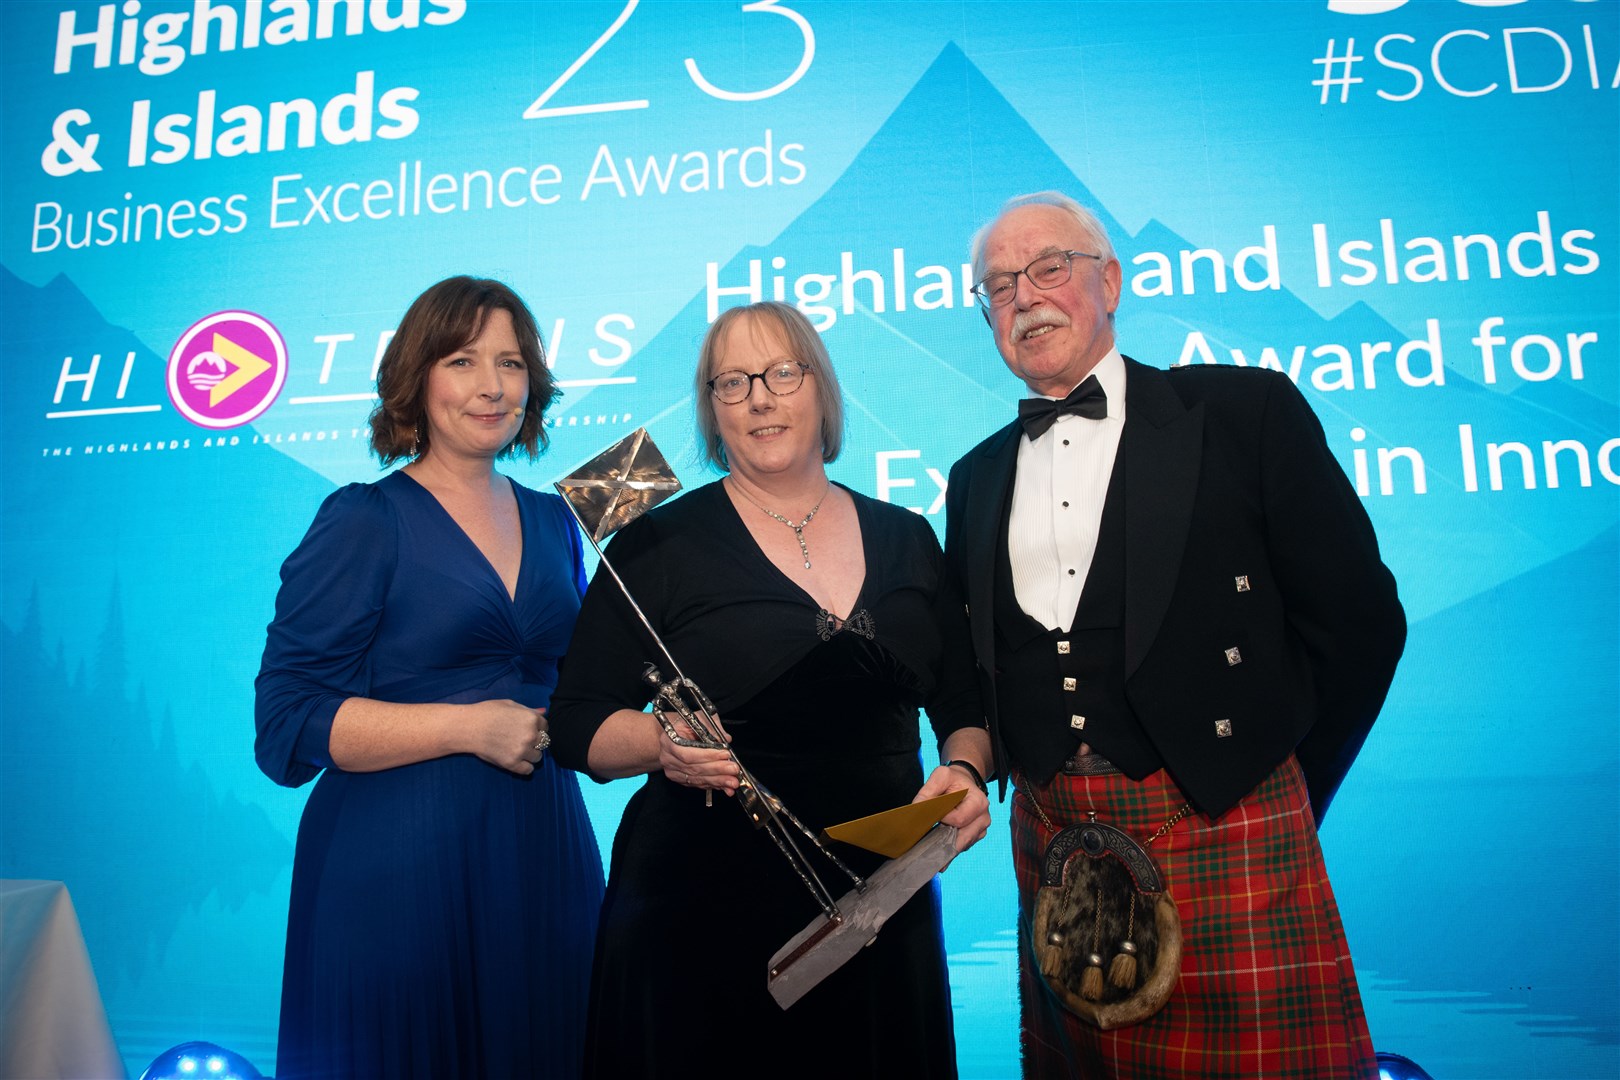 The Highlands and Islands Enterprise Award for Excellence in Innovation: HiTrans. Picture: Callum Mackay